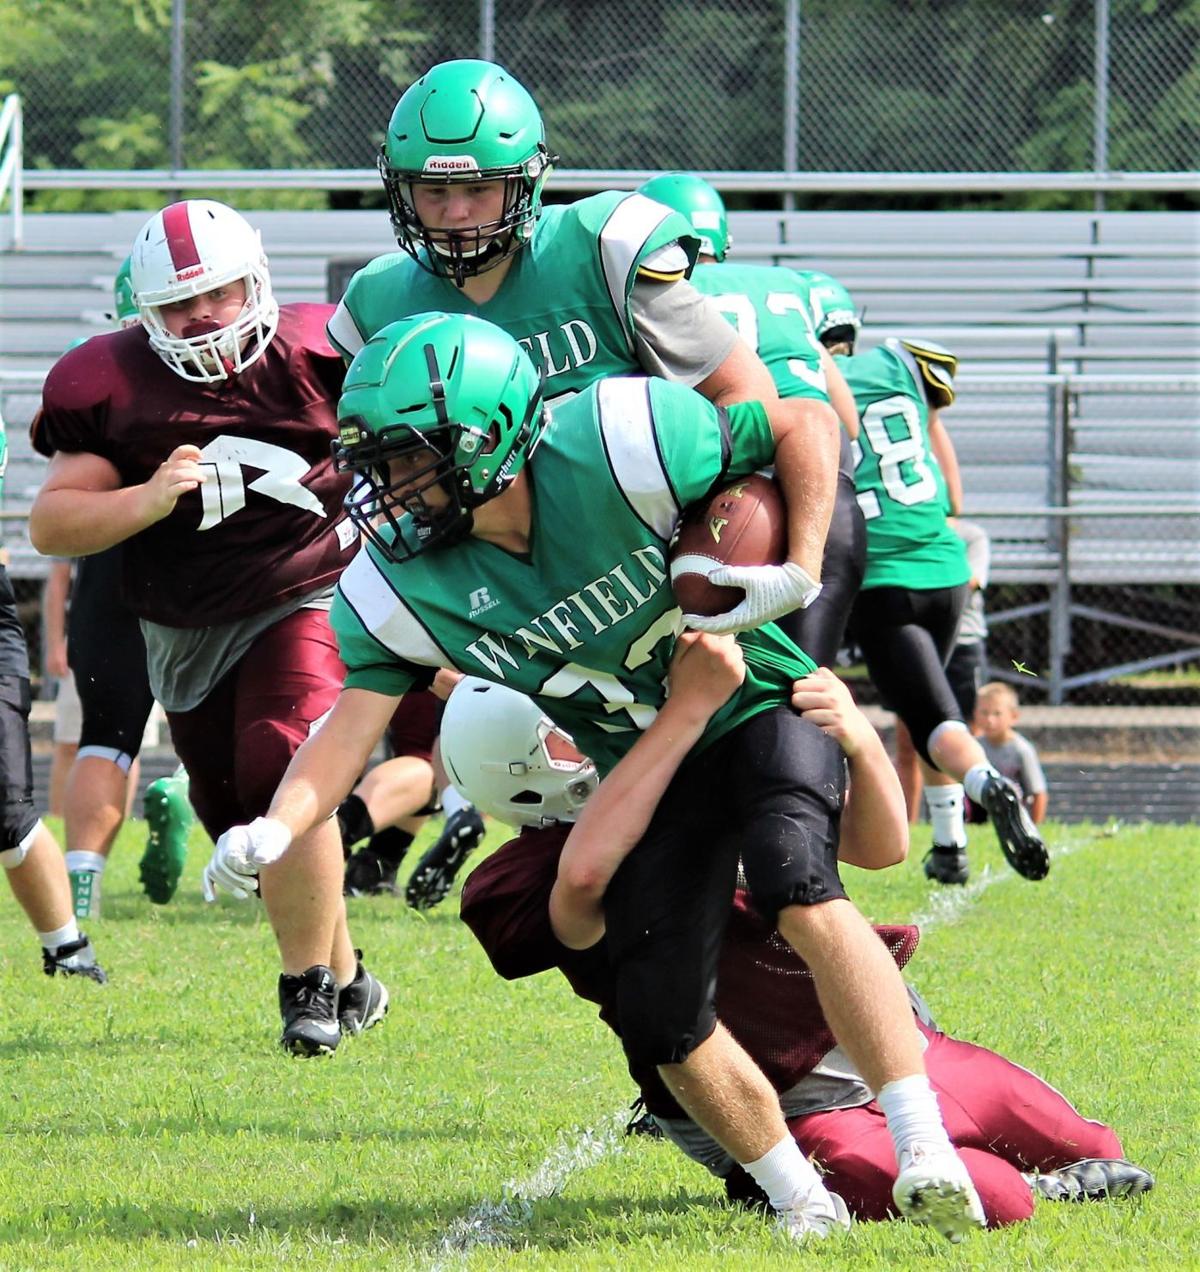 Covert leads Winfield in search of AA playoff return | Sports | herald